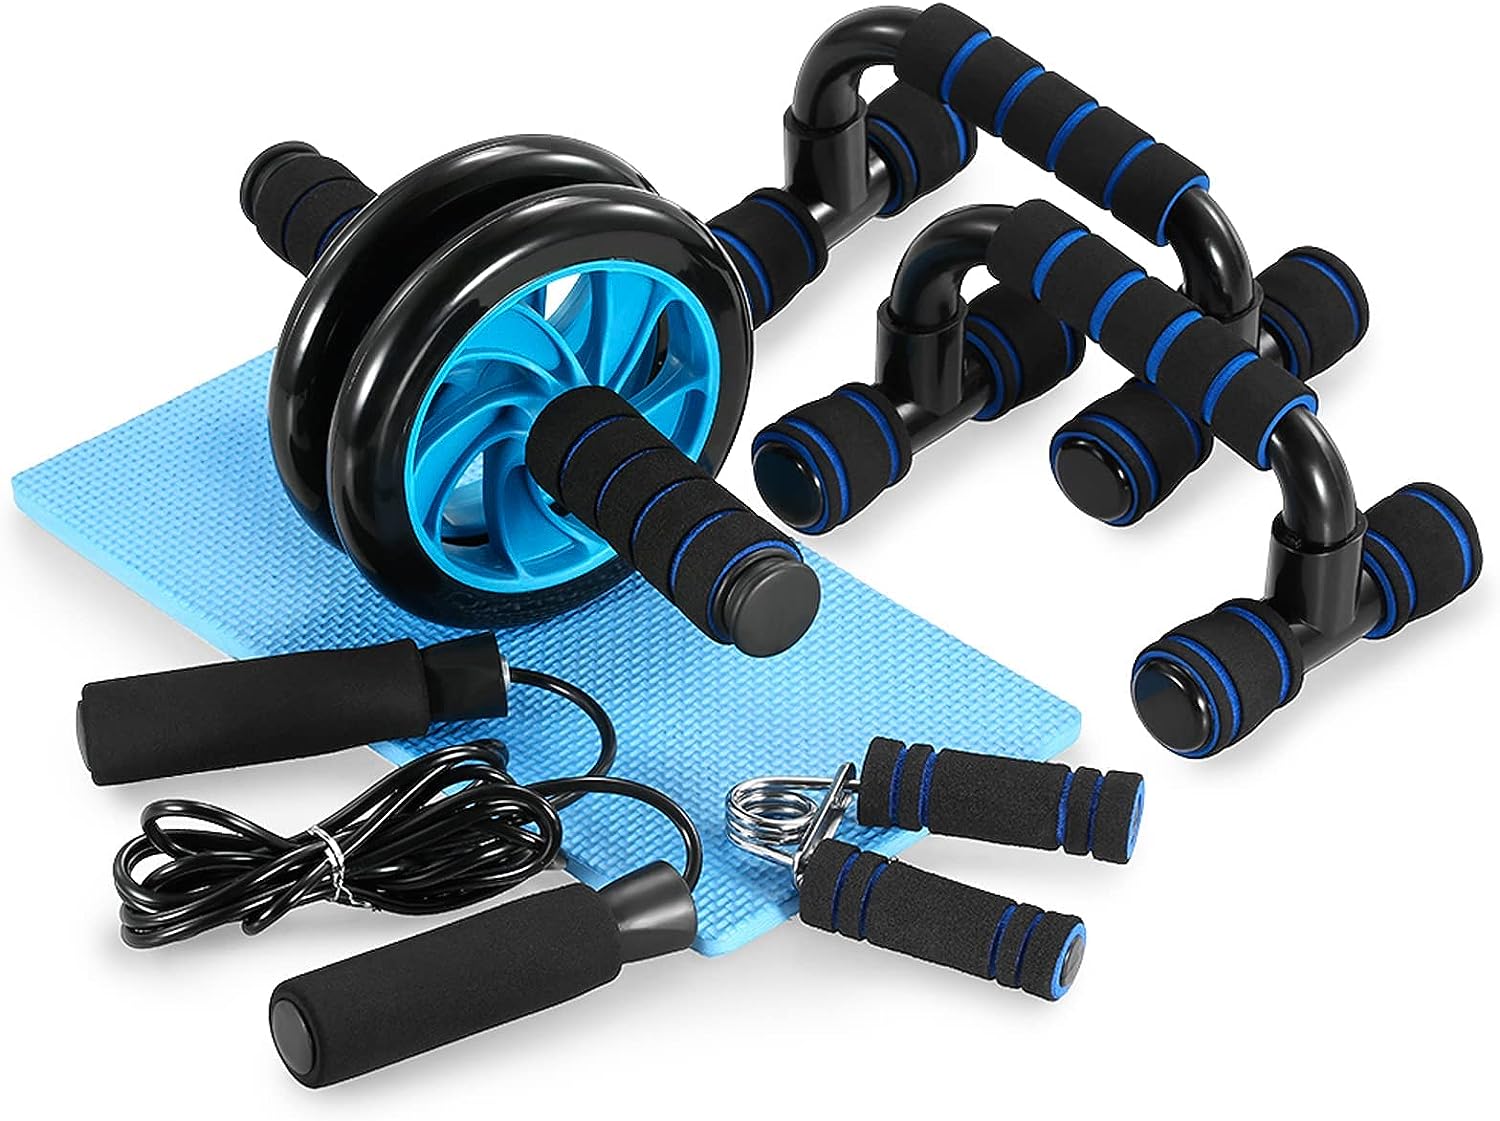 TOMSHOO 5-in-1 Abdominal Exercise Roller Set with Push-Up Bar, Gliding Discs，Skipping Rope and Knee Pad Strength Training Workout Fitness Equipment- Ab Trainer for Home and Gym